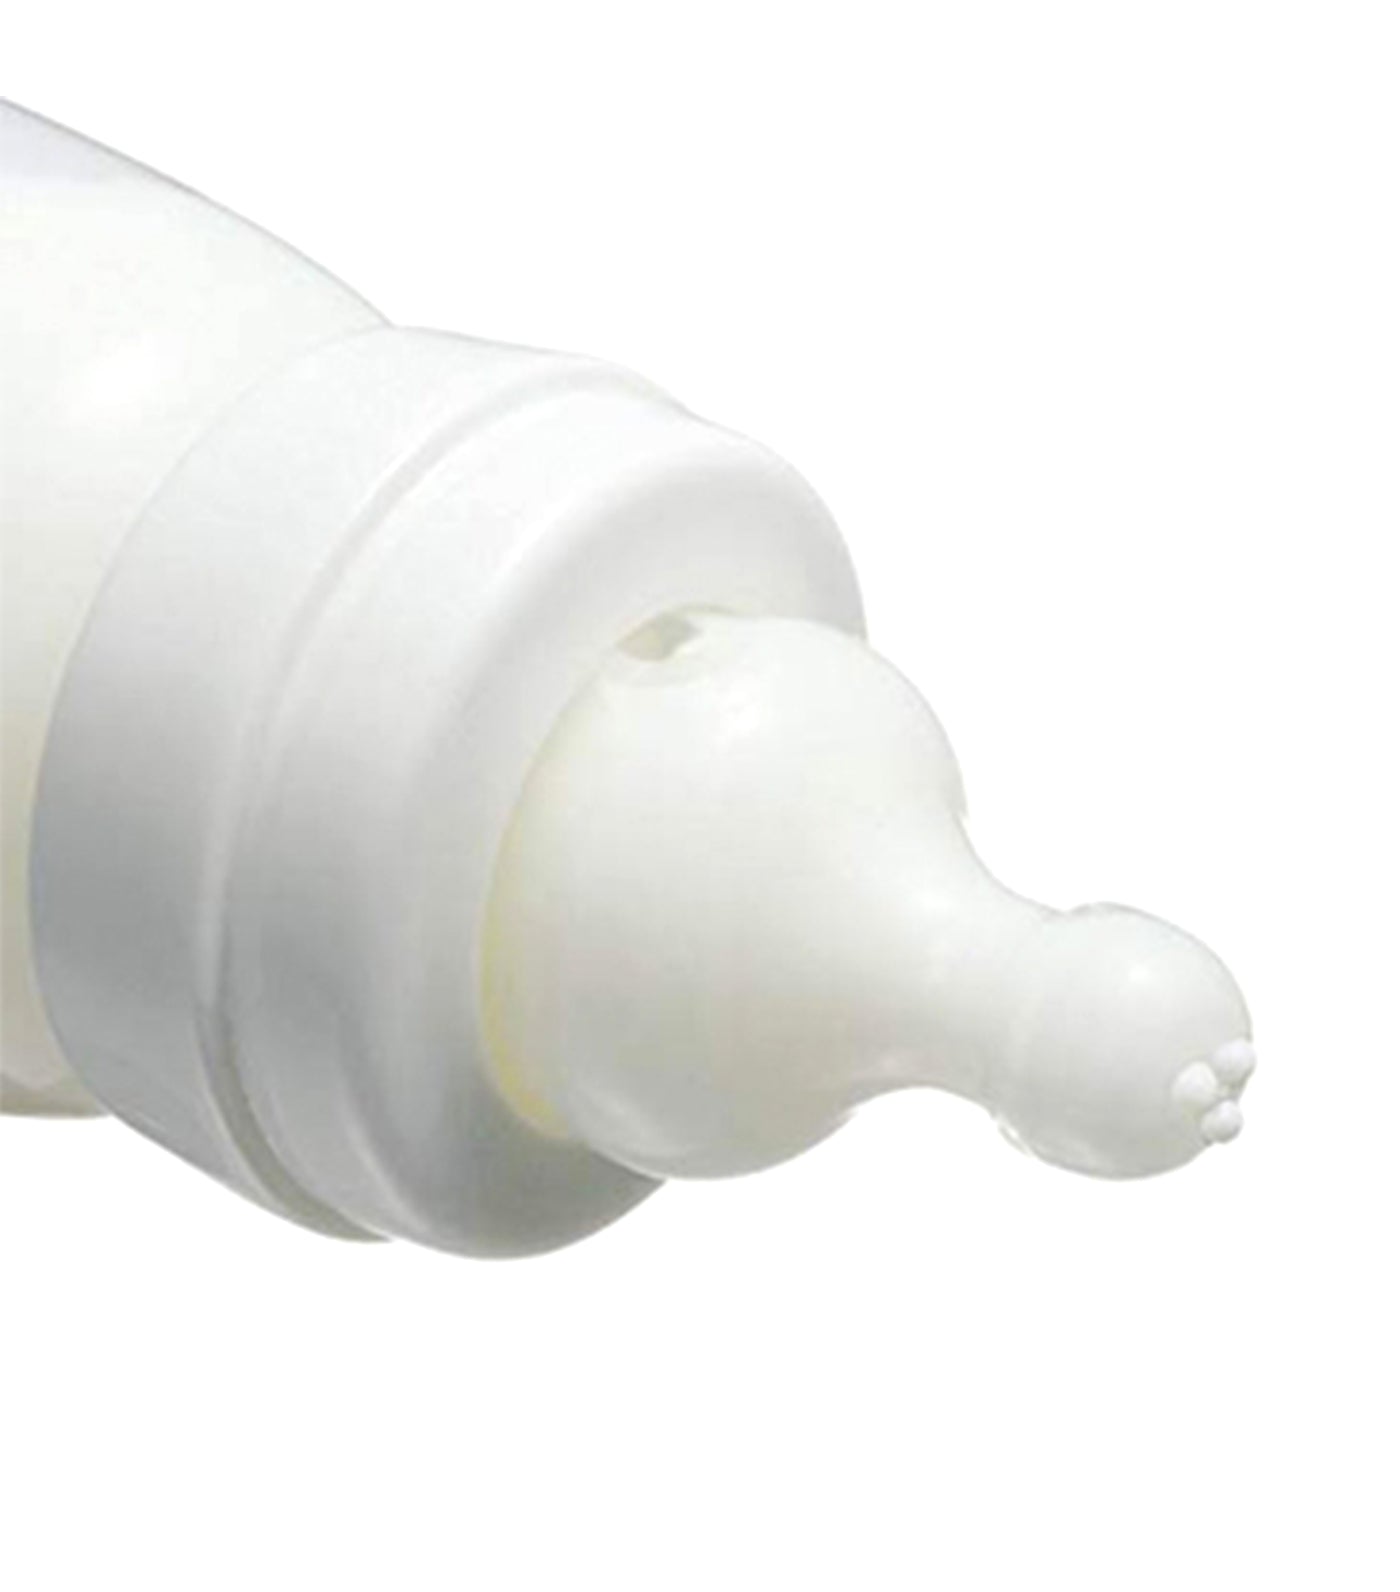 combi spare 3-hole teat (pack of 2) - small